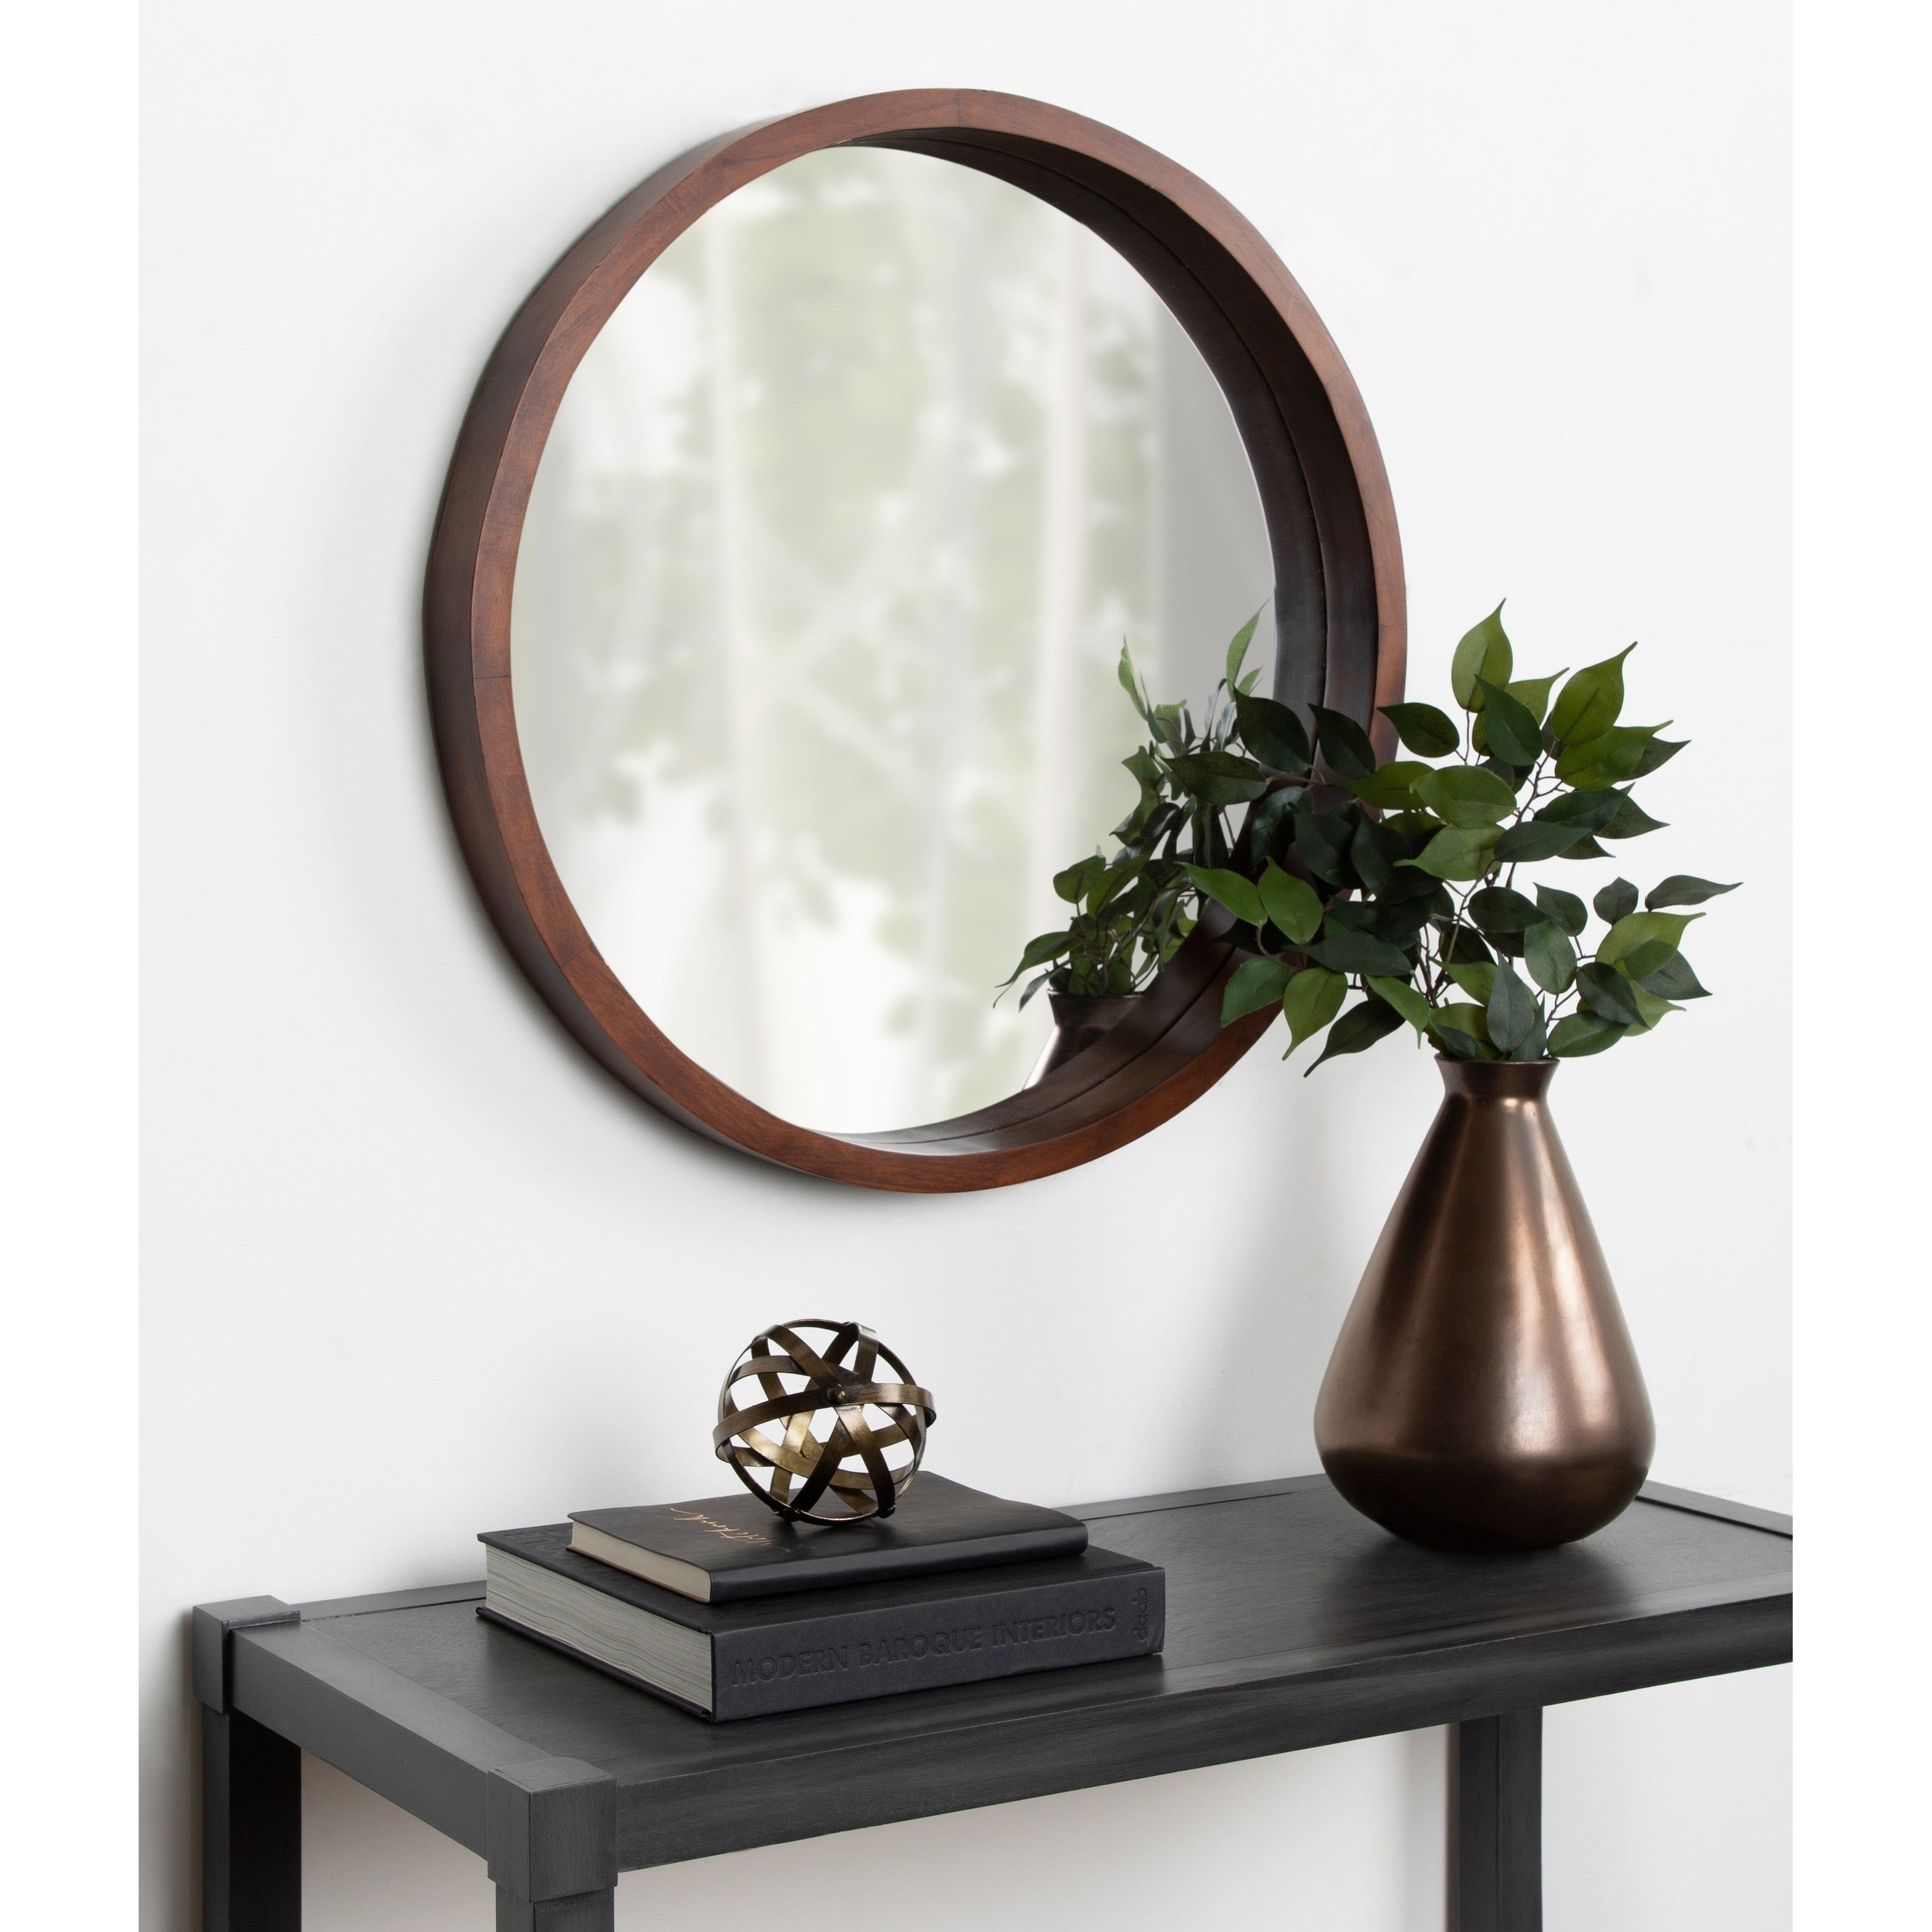 Accent Mirrors | Shop Online At Overstock Pertaining To Derick Accent Mirrors (View 4 of 20)